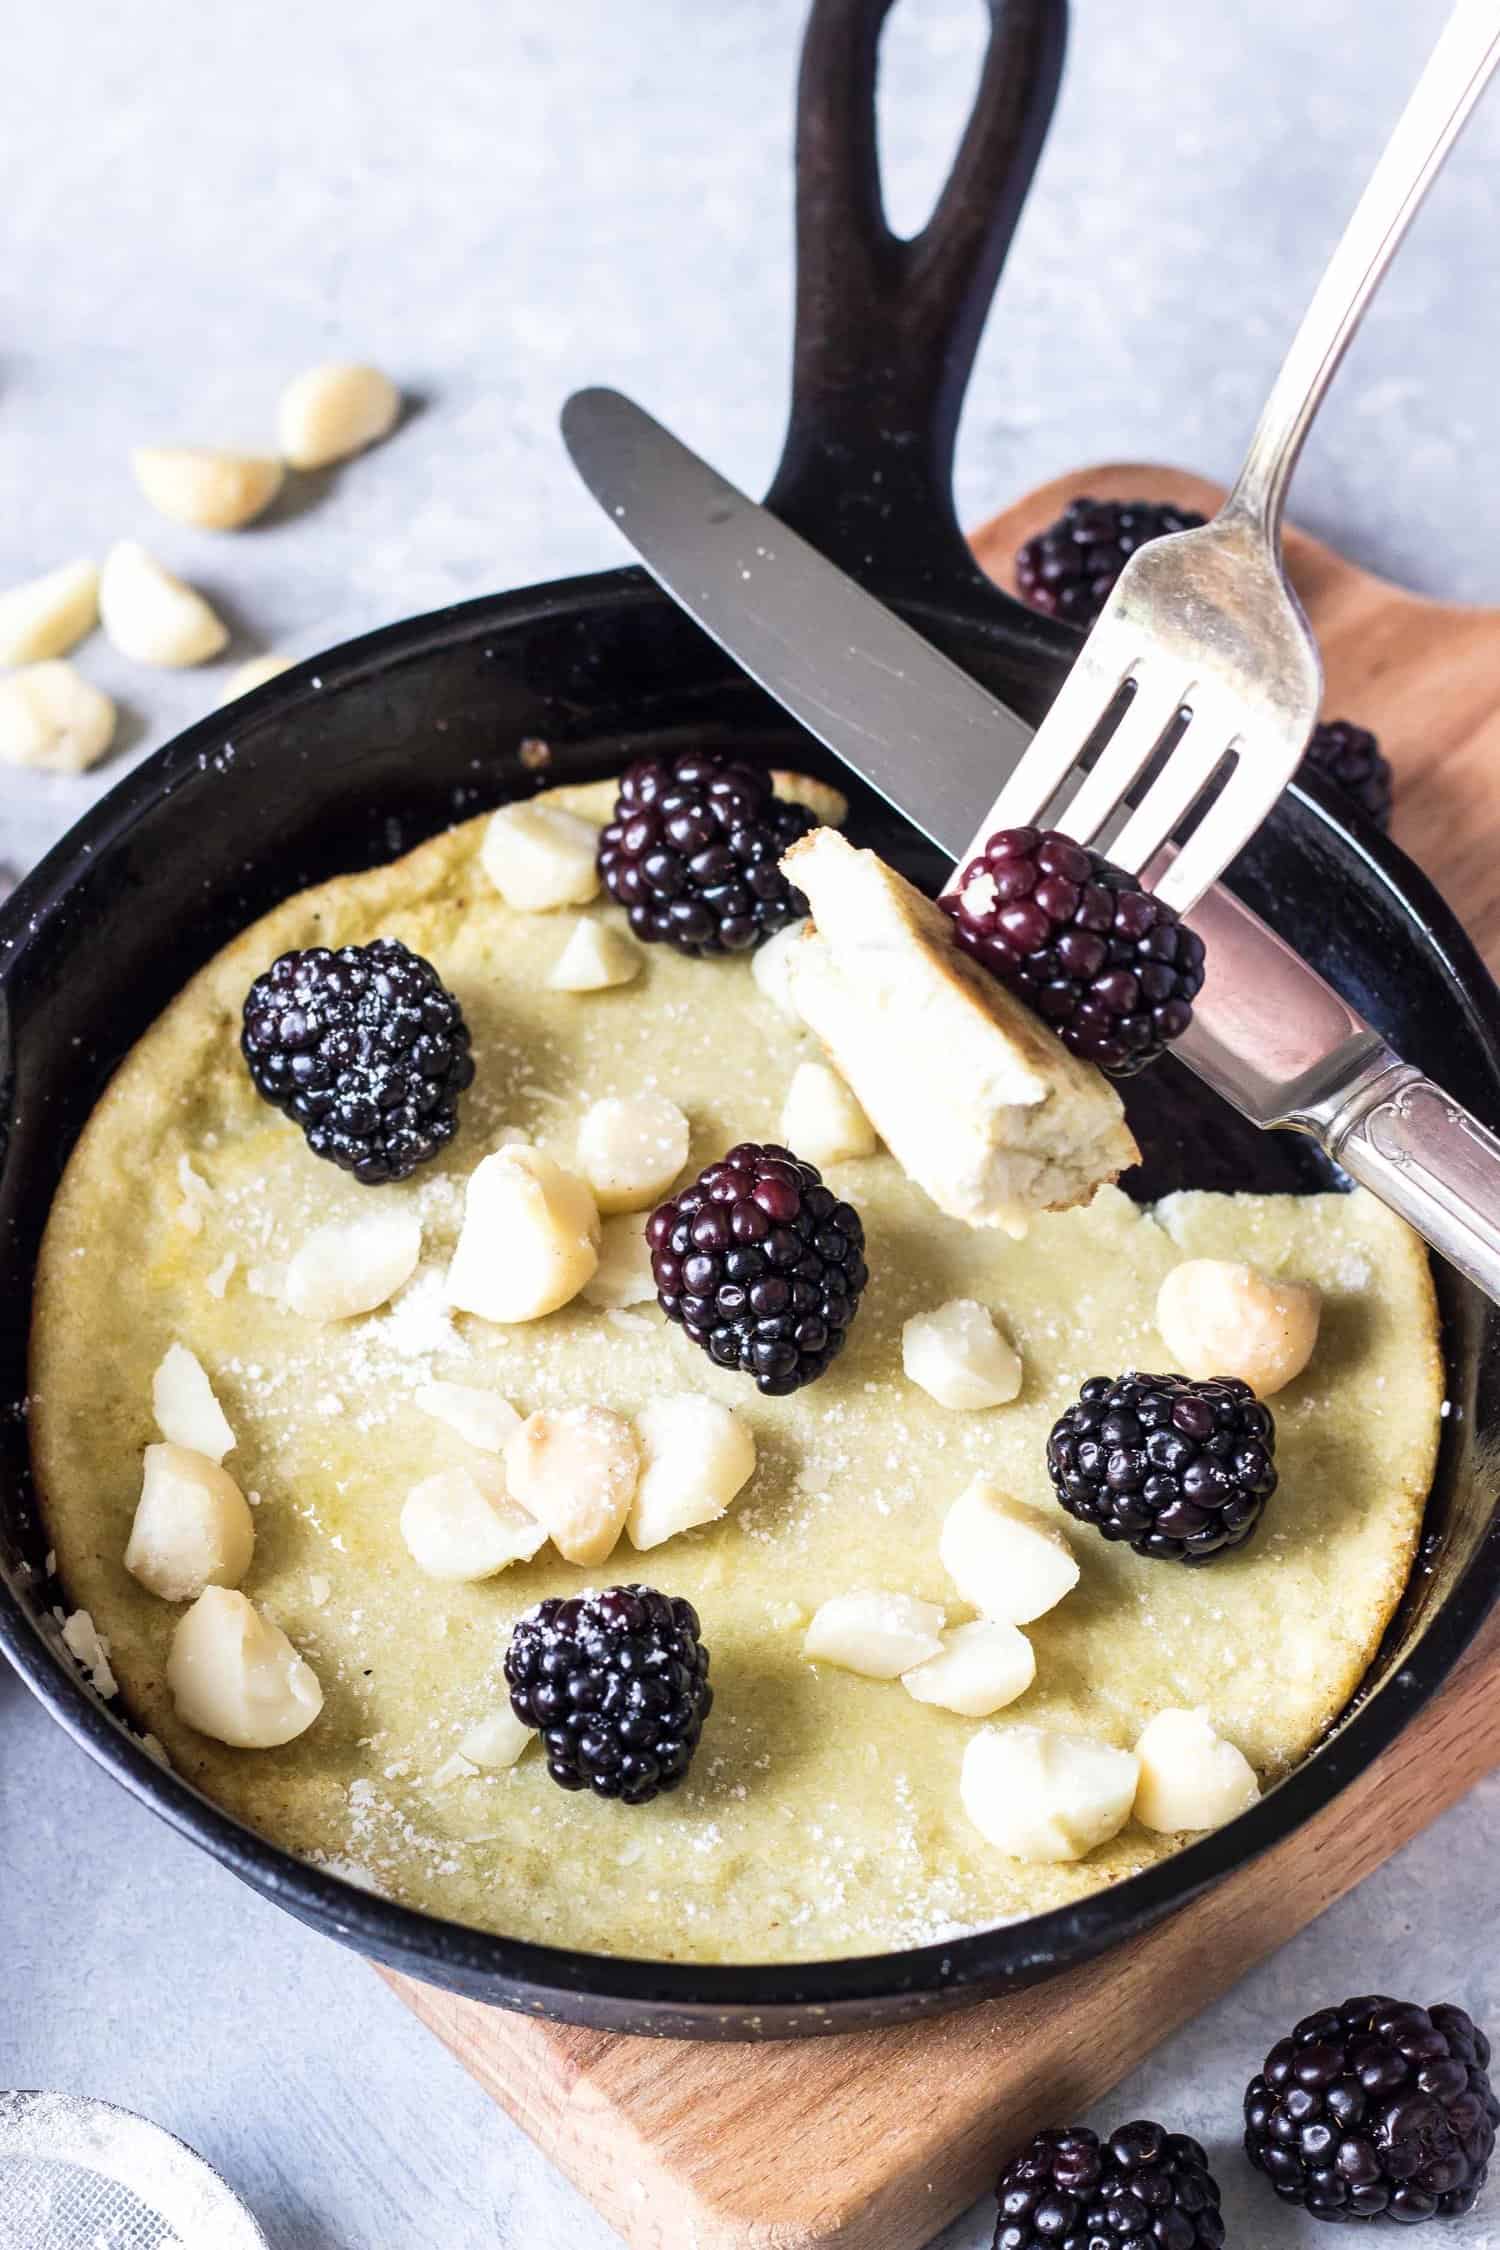 Keto Dutch Baby in a small cast iron skillet topped with blackberries and macadamia nuts.